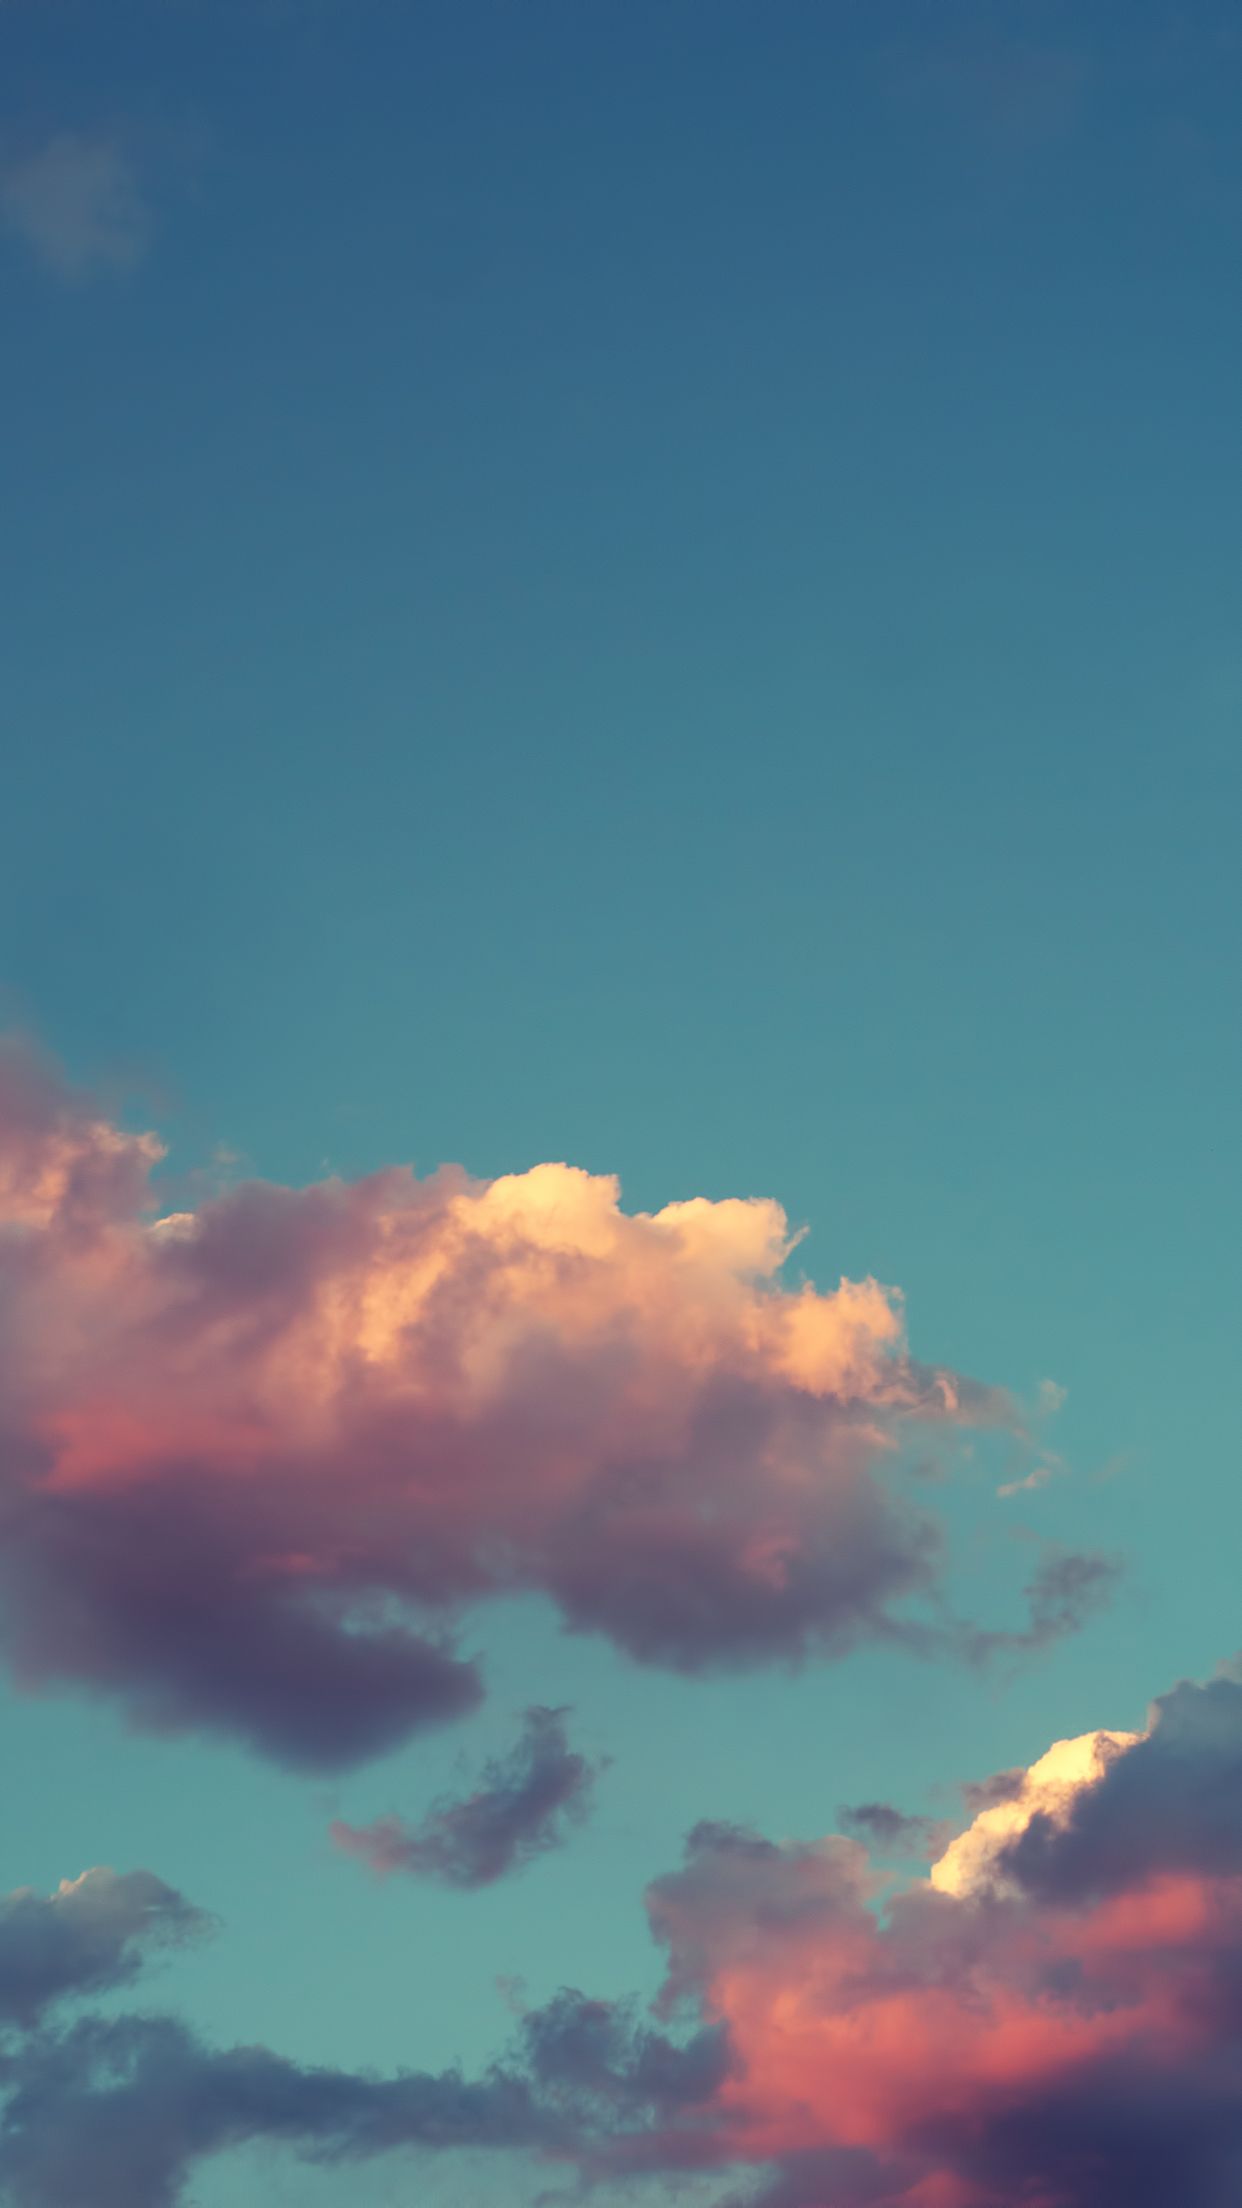 Clouds looking like cotton candy. Cloud wallpaper, Best iphone wallpaper, Aesthetic wallpaper